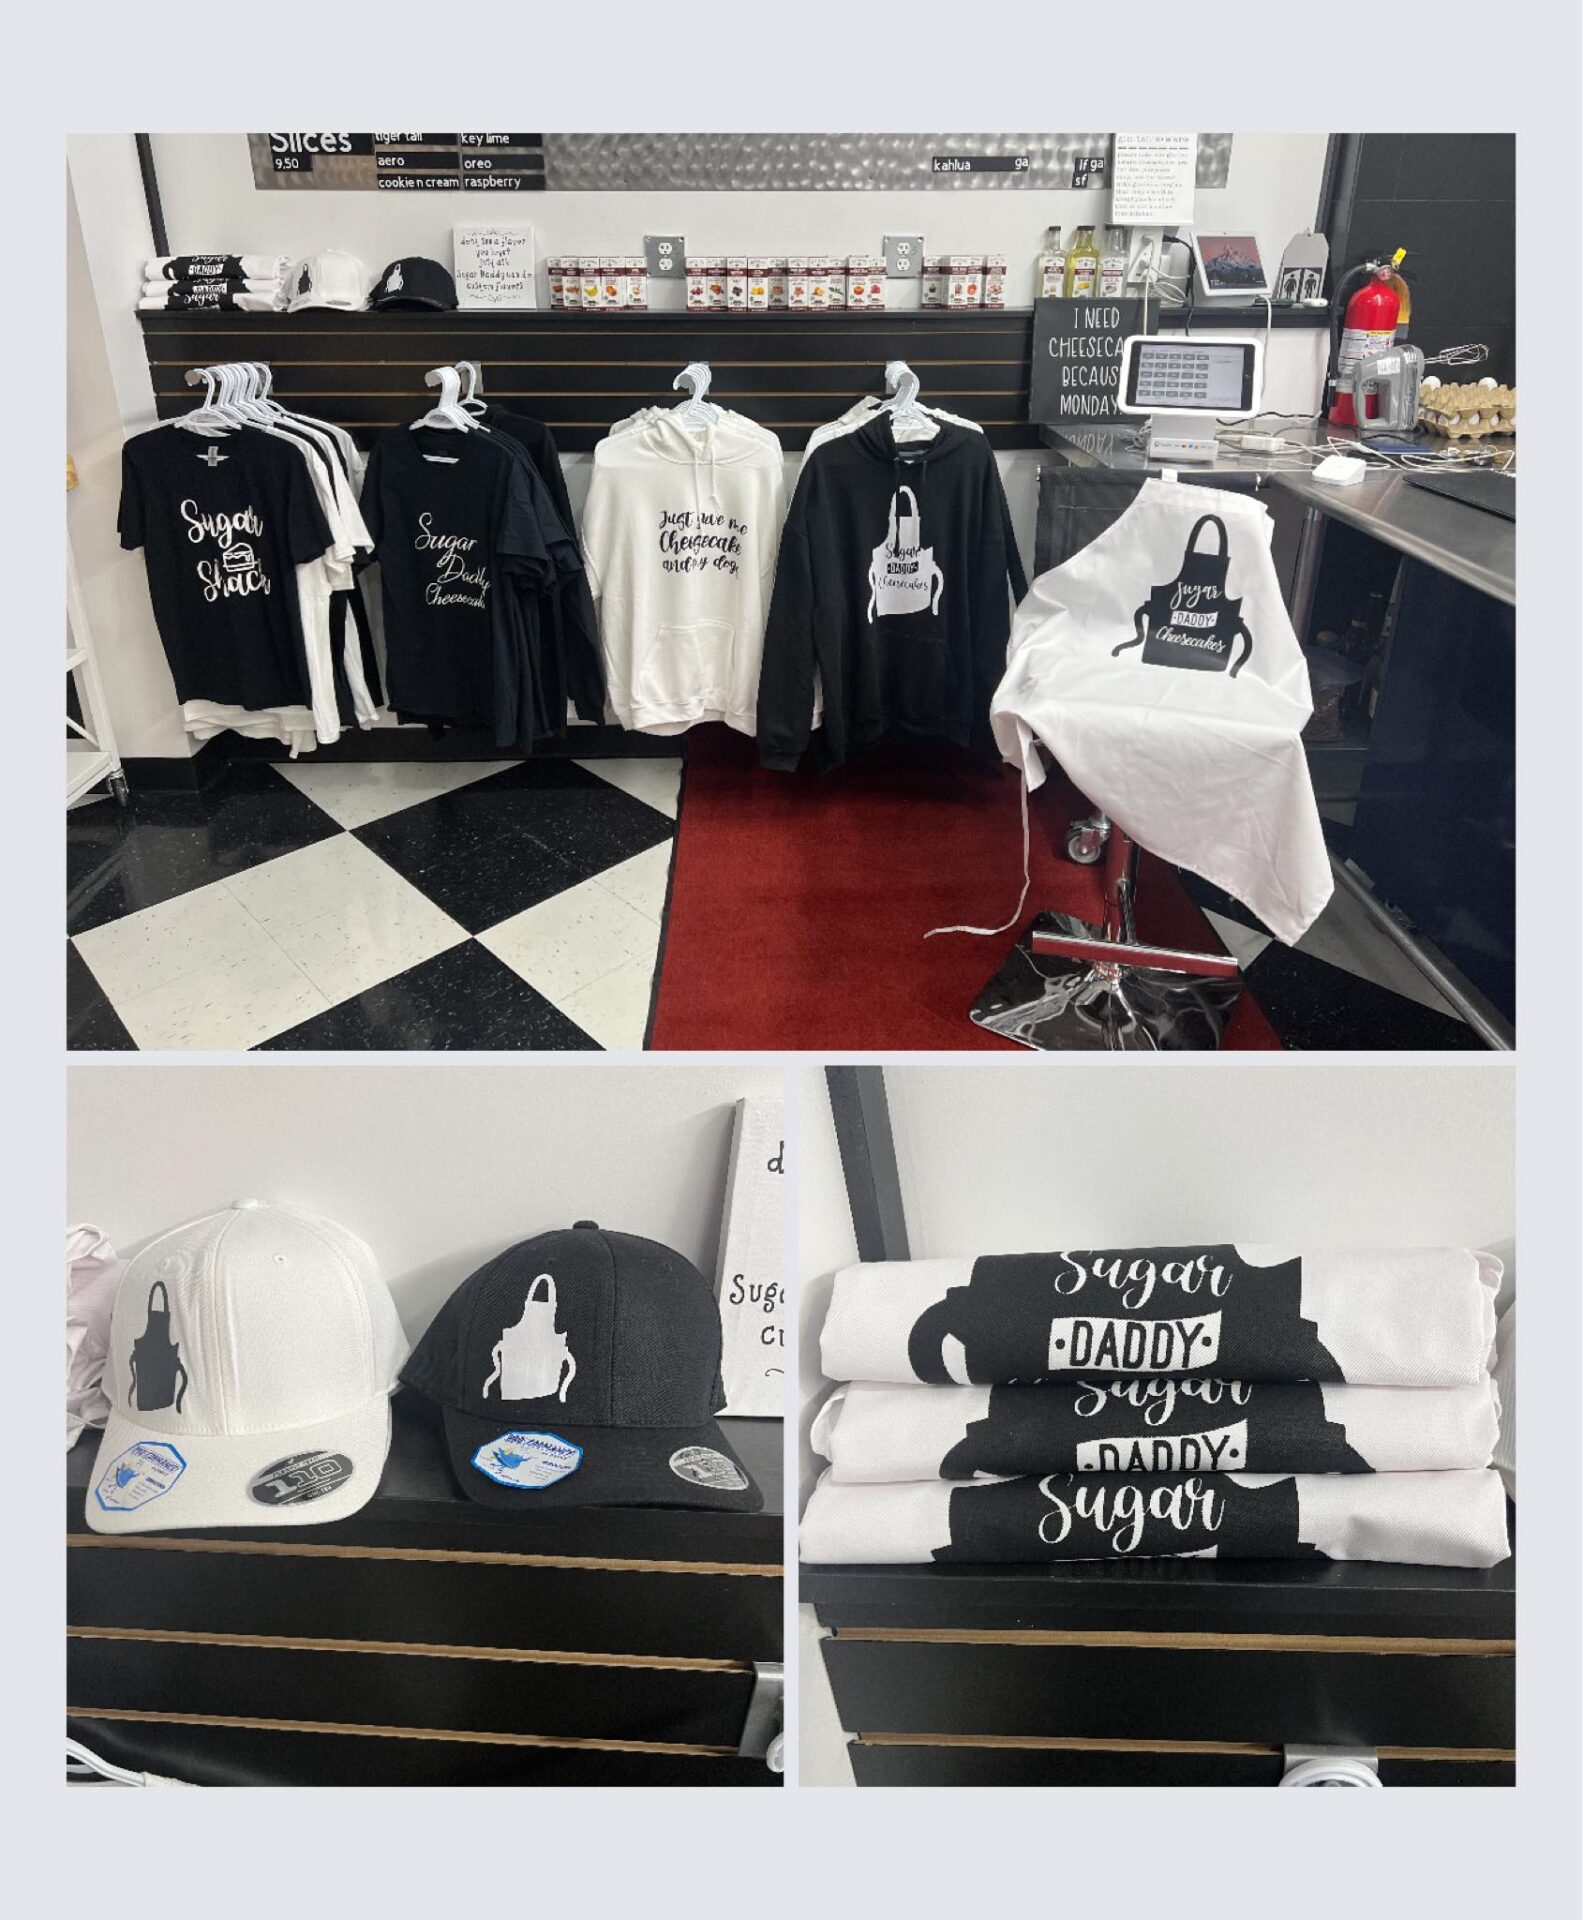 A bunch of black and white shirts on display